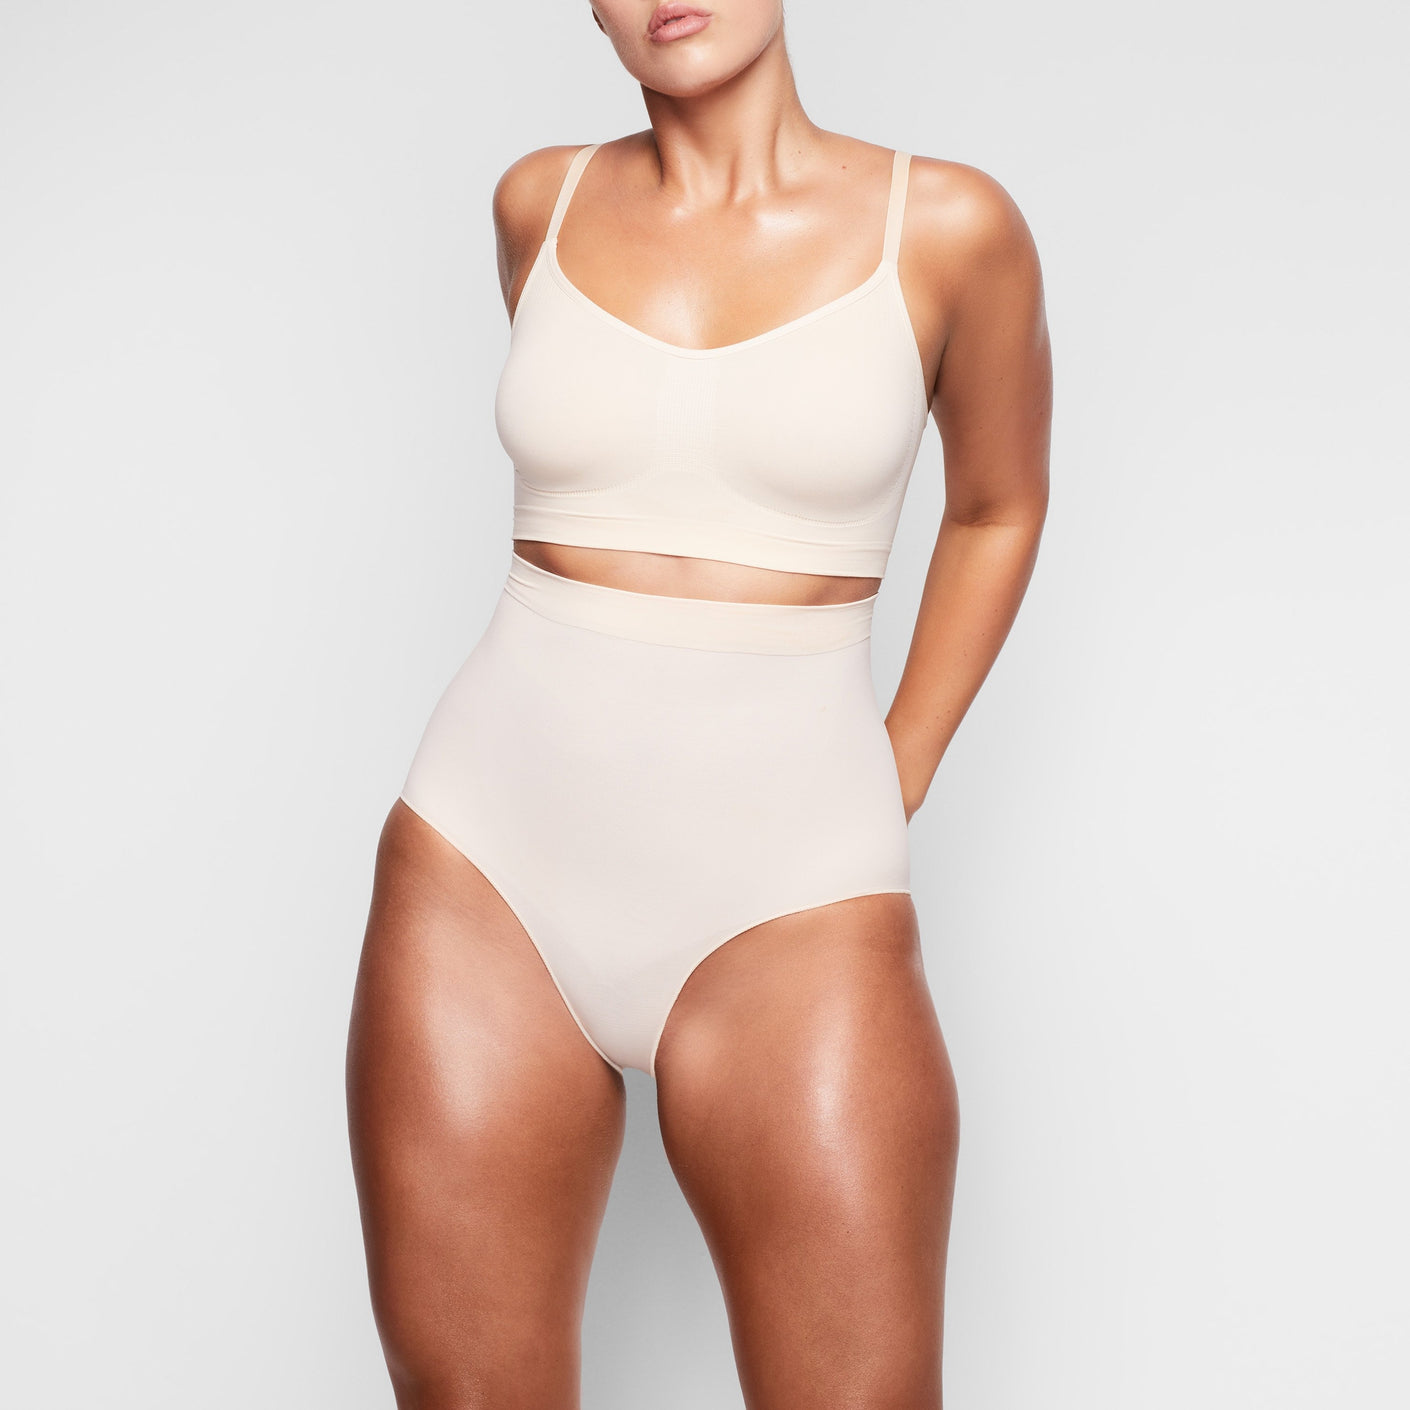 https://cdn.shopify.com/s/files/1/0259/5448/4284/products/SKIMS-SHAPEWEAR-SH-MWB-0101-SND-C-FR_48877d56-43e6-4a96-85e7-f5f7514f82f6.jpg?v=1682103155&width=1410&height=1410